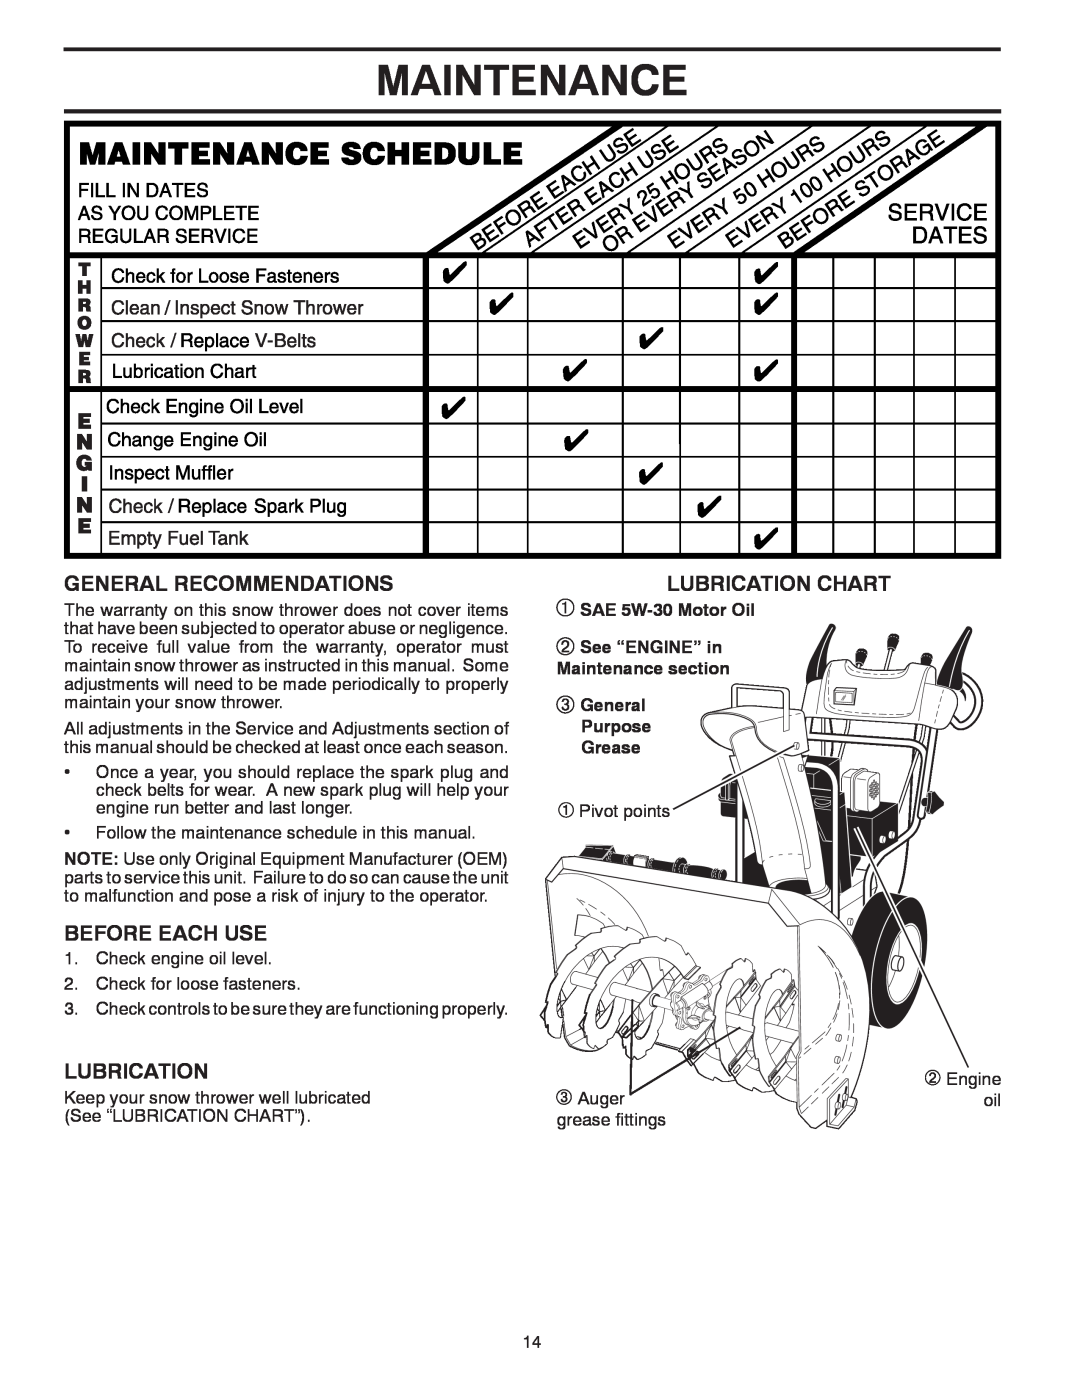 Poulan 428556 owner manual Maintenance, General Recommendations, Before Each Use, Lubrication Chart, Purpose Grease 